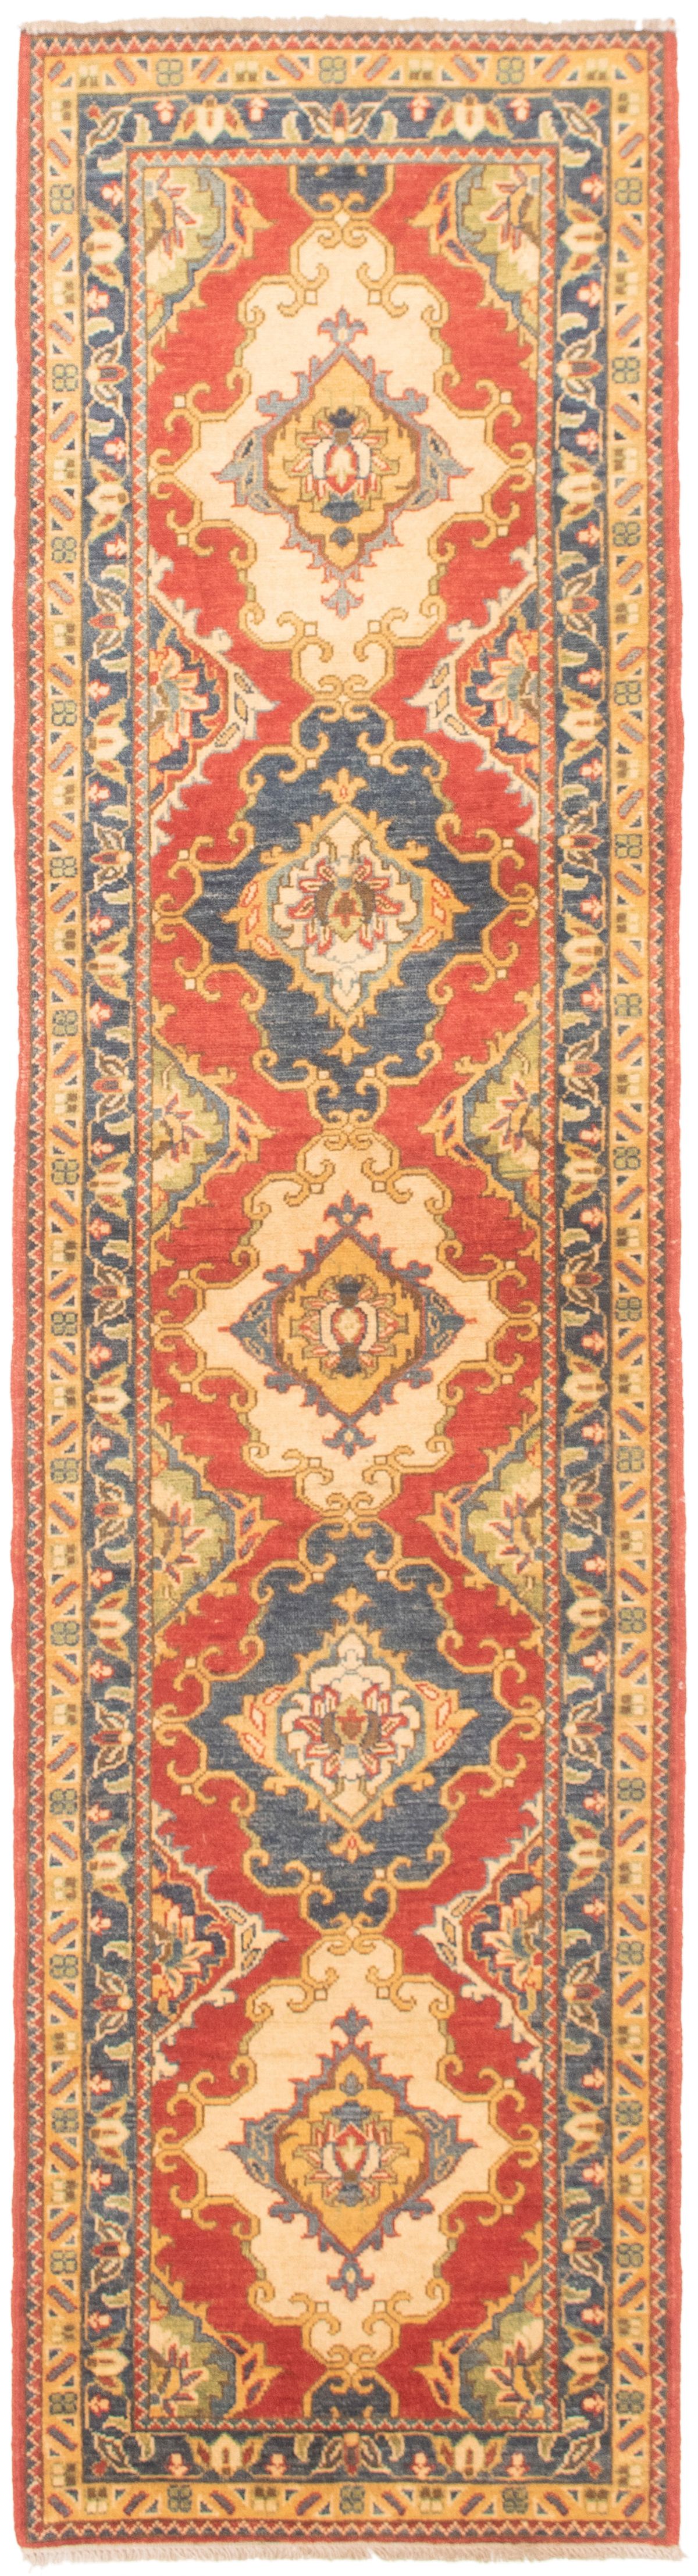 Hand-knotted Finest Gazni Red Wool Rug 2'6" x 9'7"  Size: 2'6" x 9'7"  